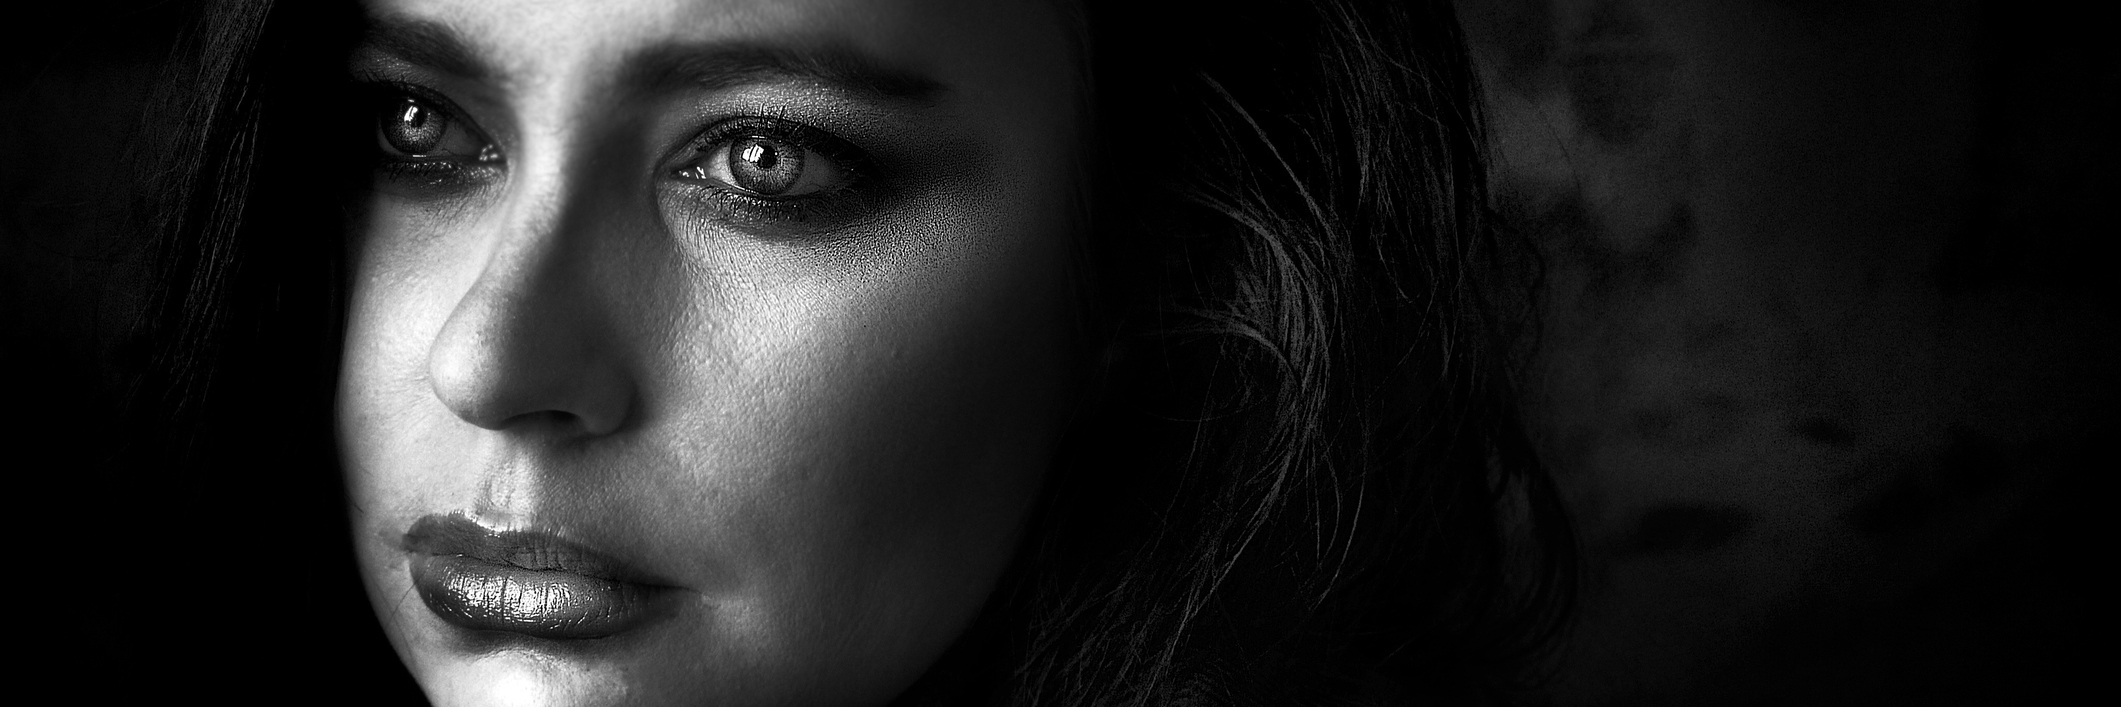 Black and white close-up of woman looking away from camera.